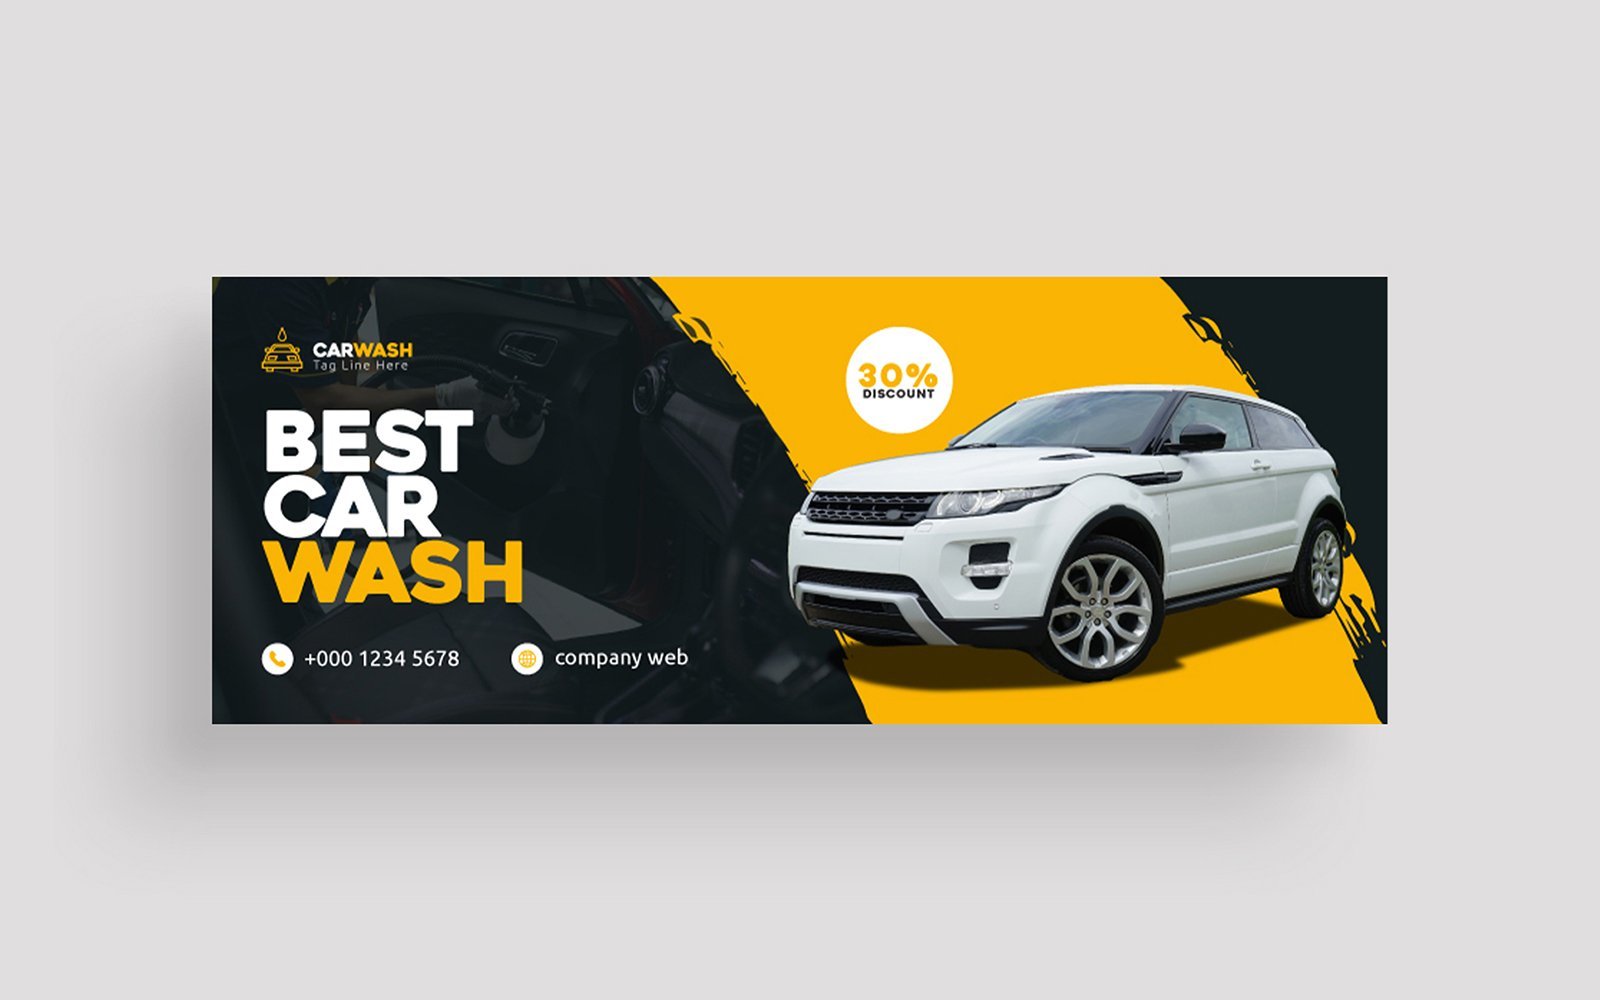 Template #295099 Car Wash Webdesign Template - Logo template Preview